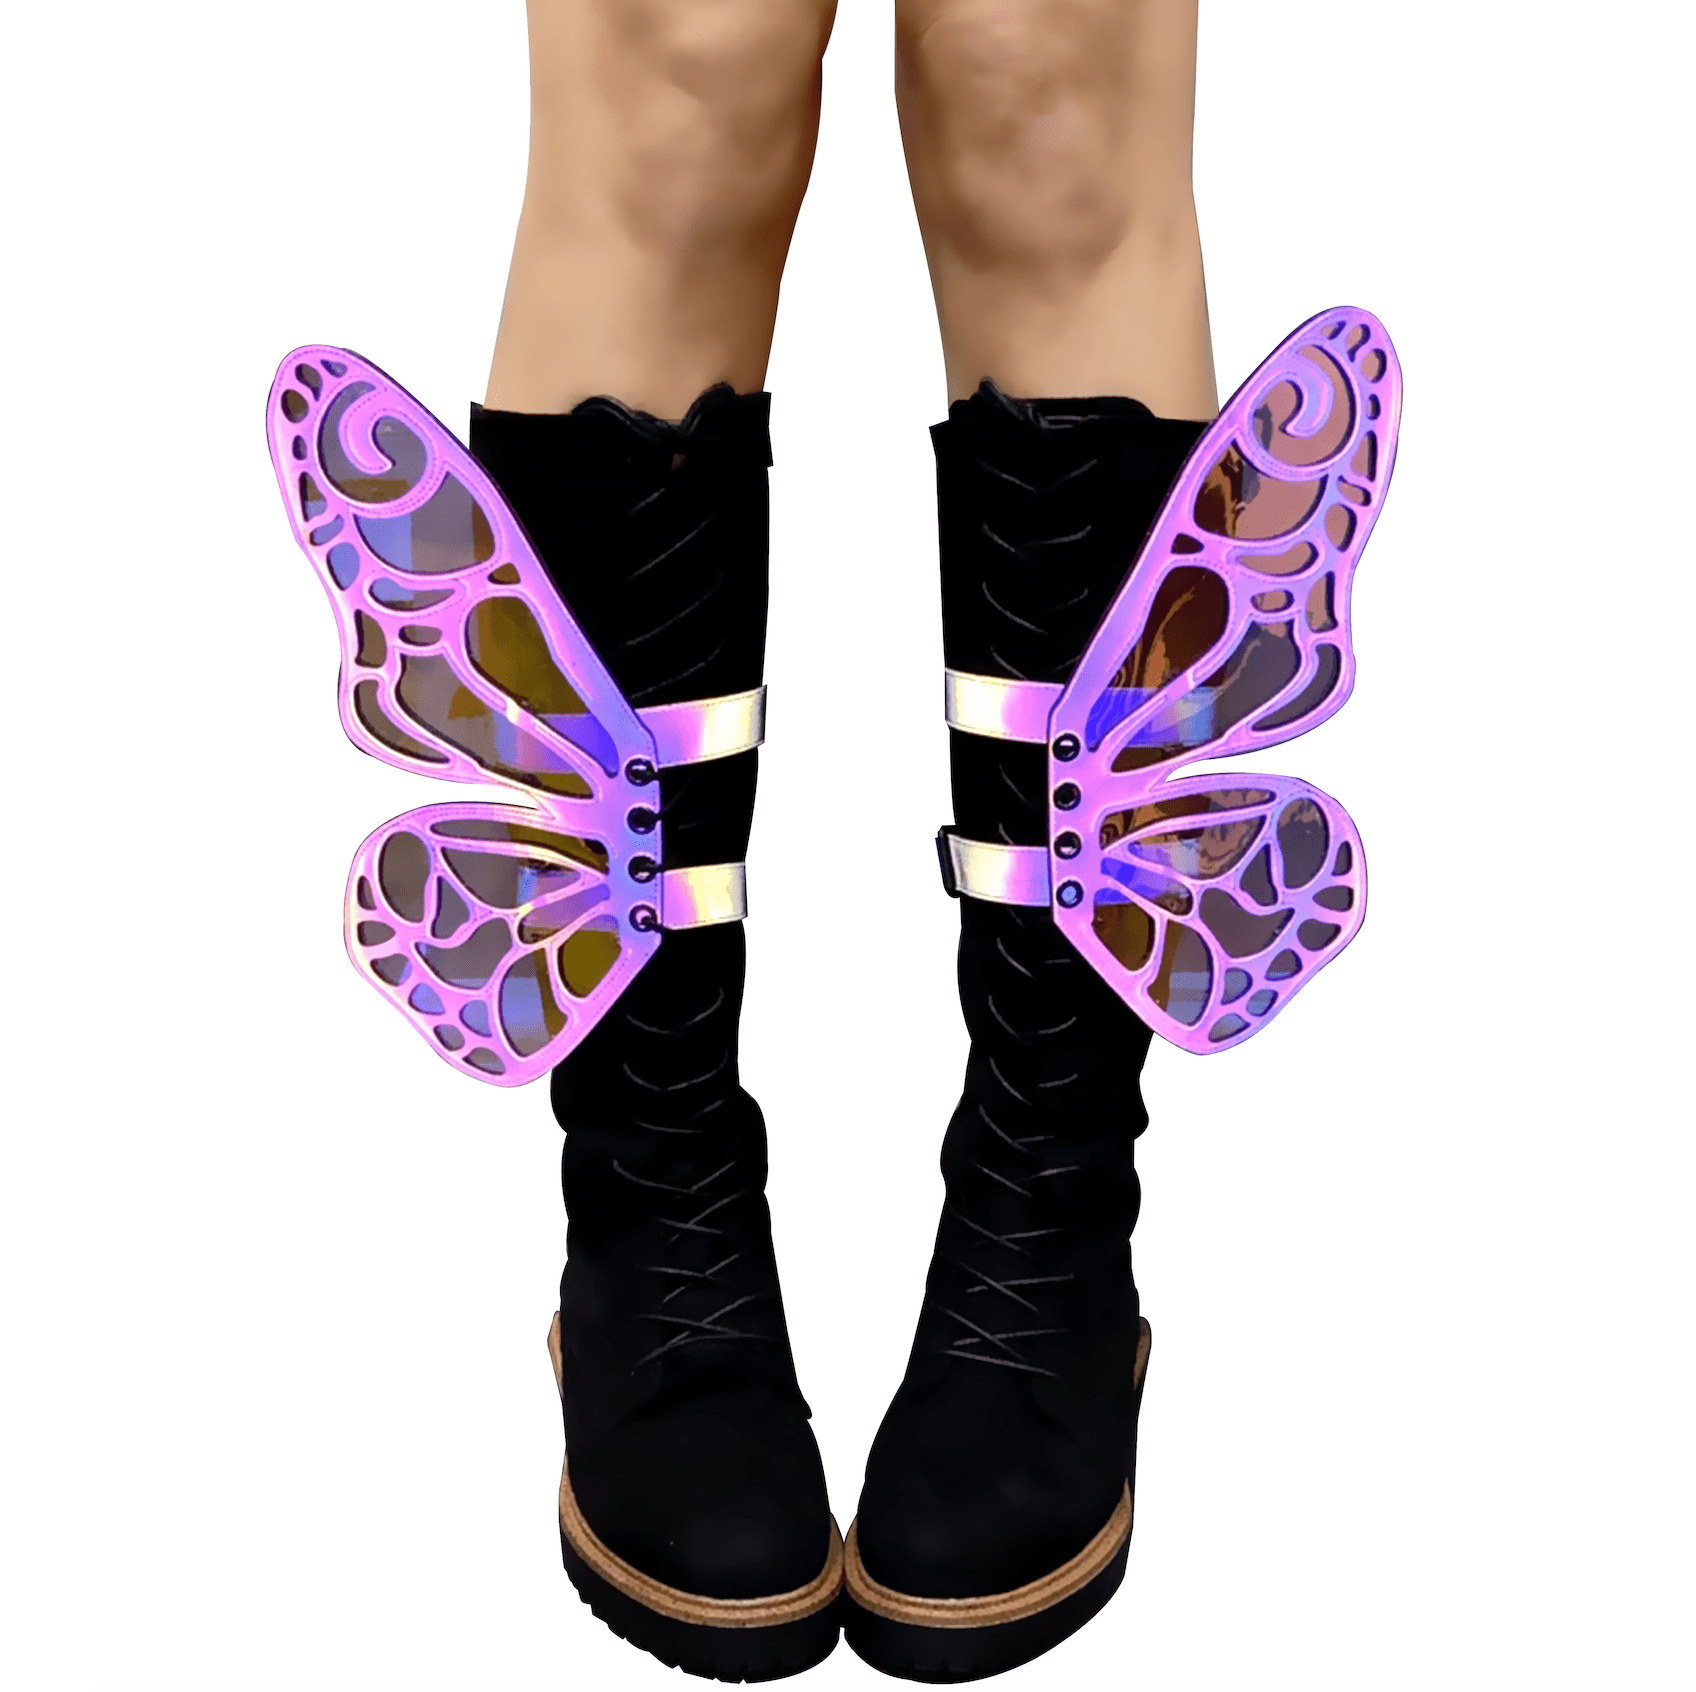 FlutterByeee Reflective Butterfly Wingz For Calf Or Boot 6